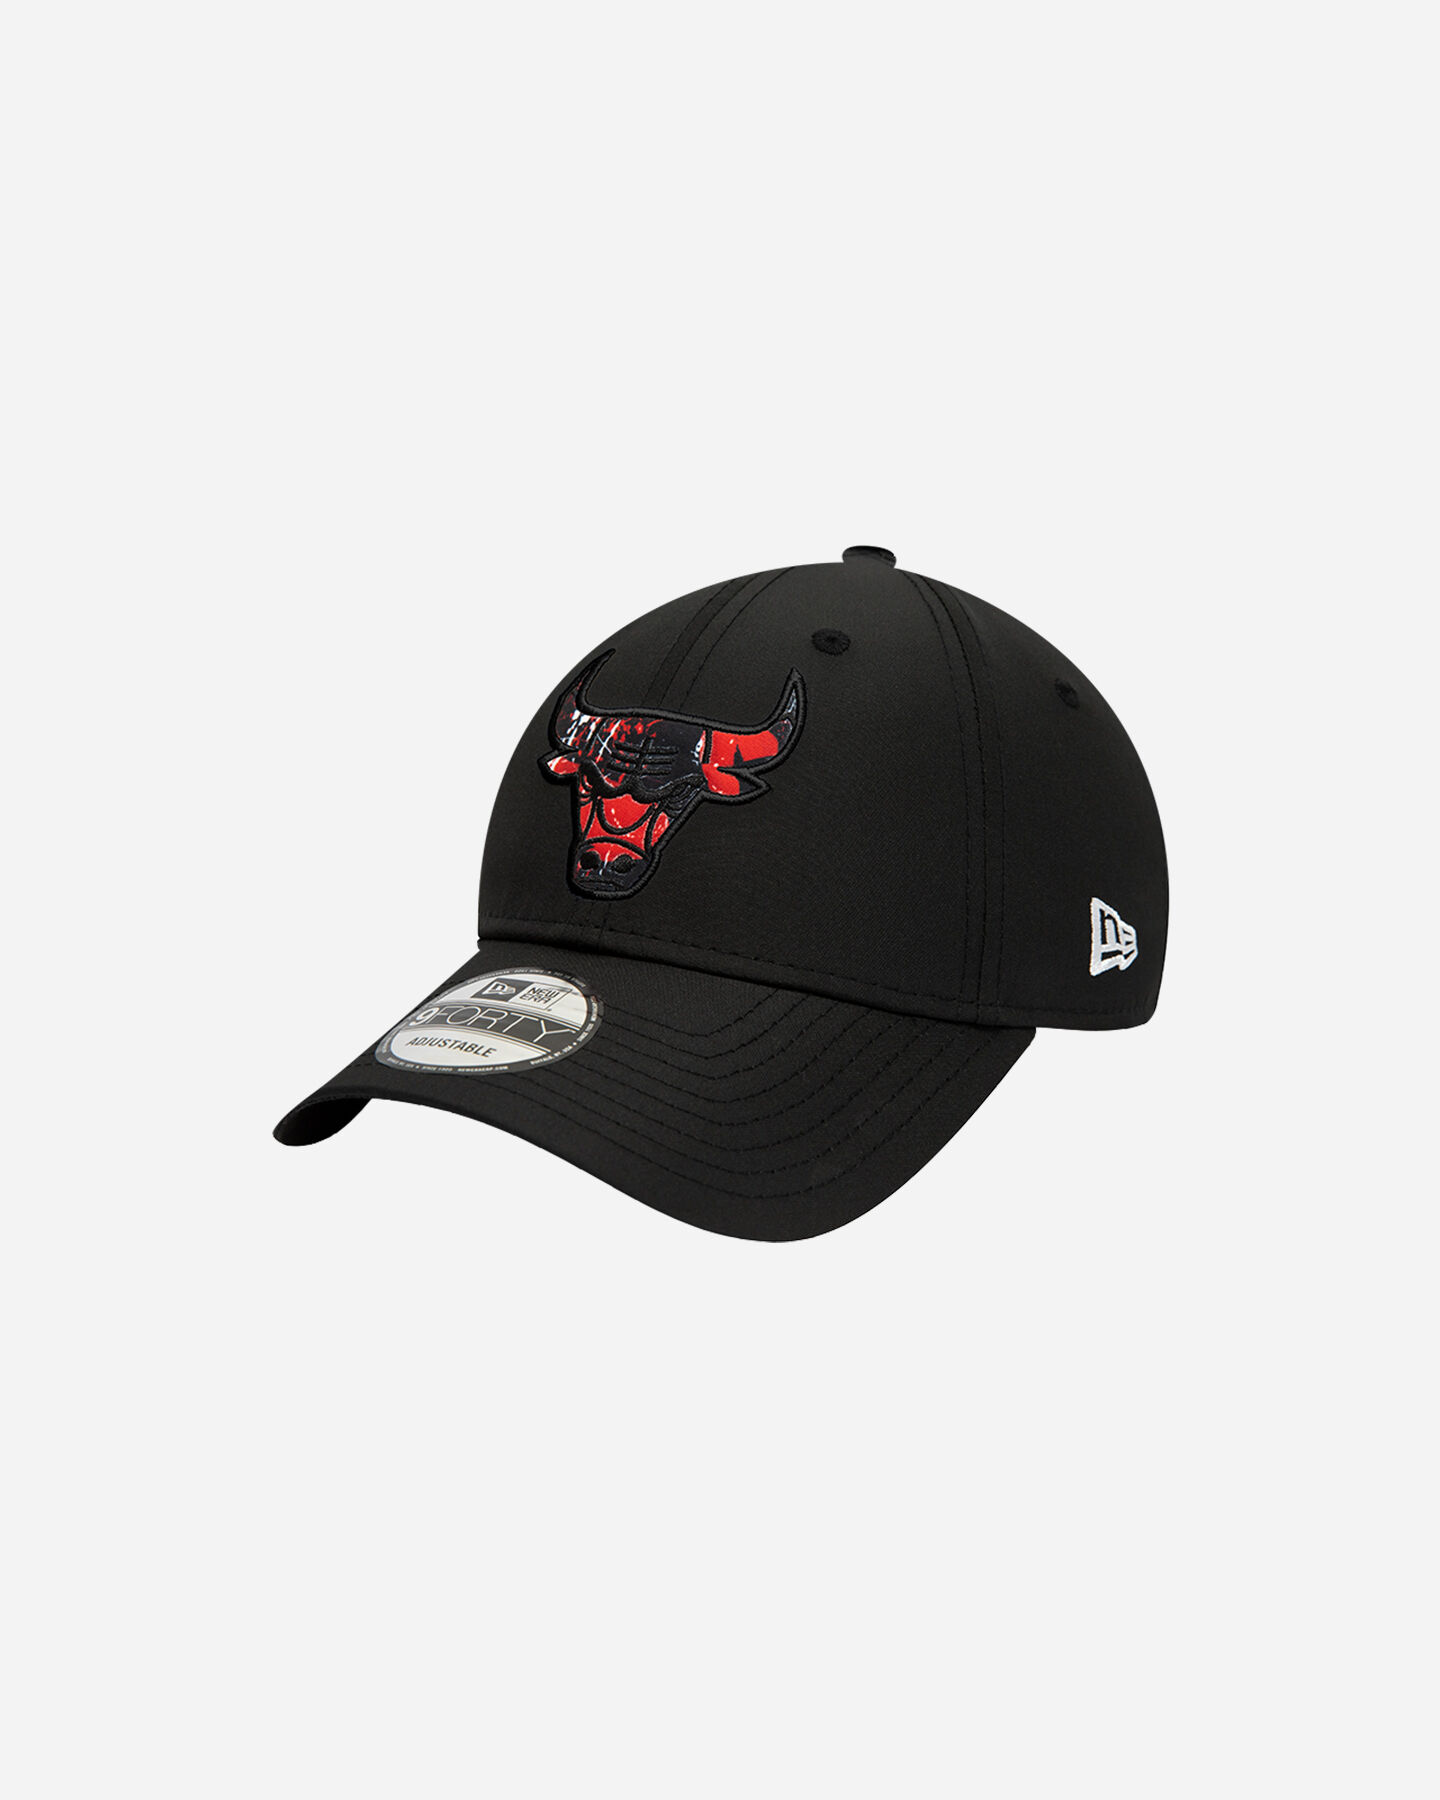  Cappellino NEW ERA 9FORTY PRINT INFILL CHICAGO BULLS  S5546175|001|OSFM scatto 0